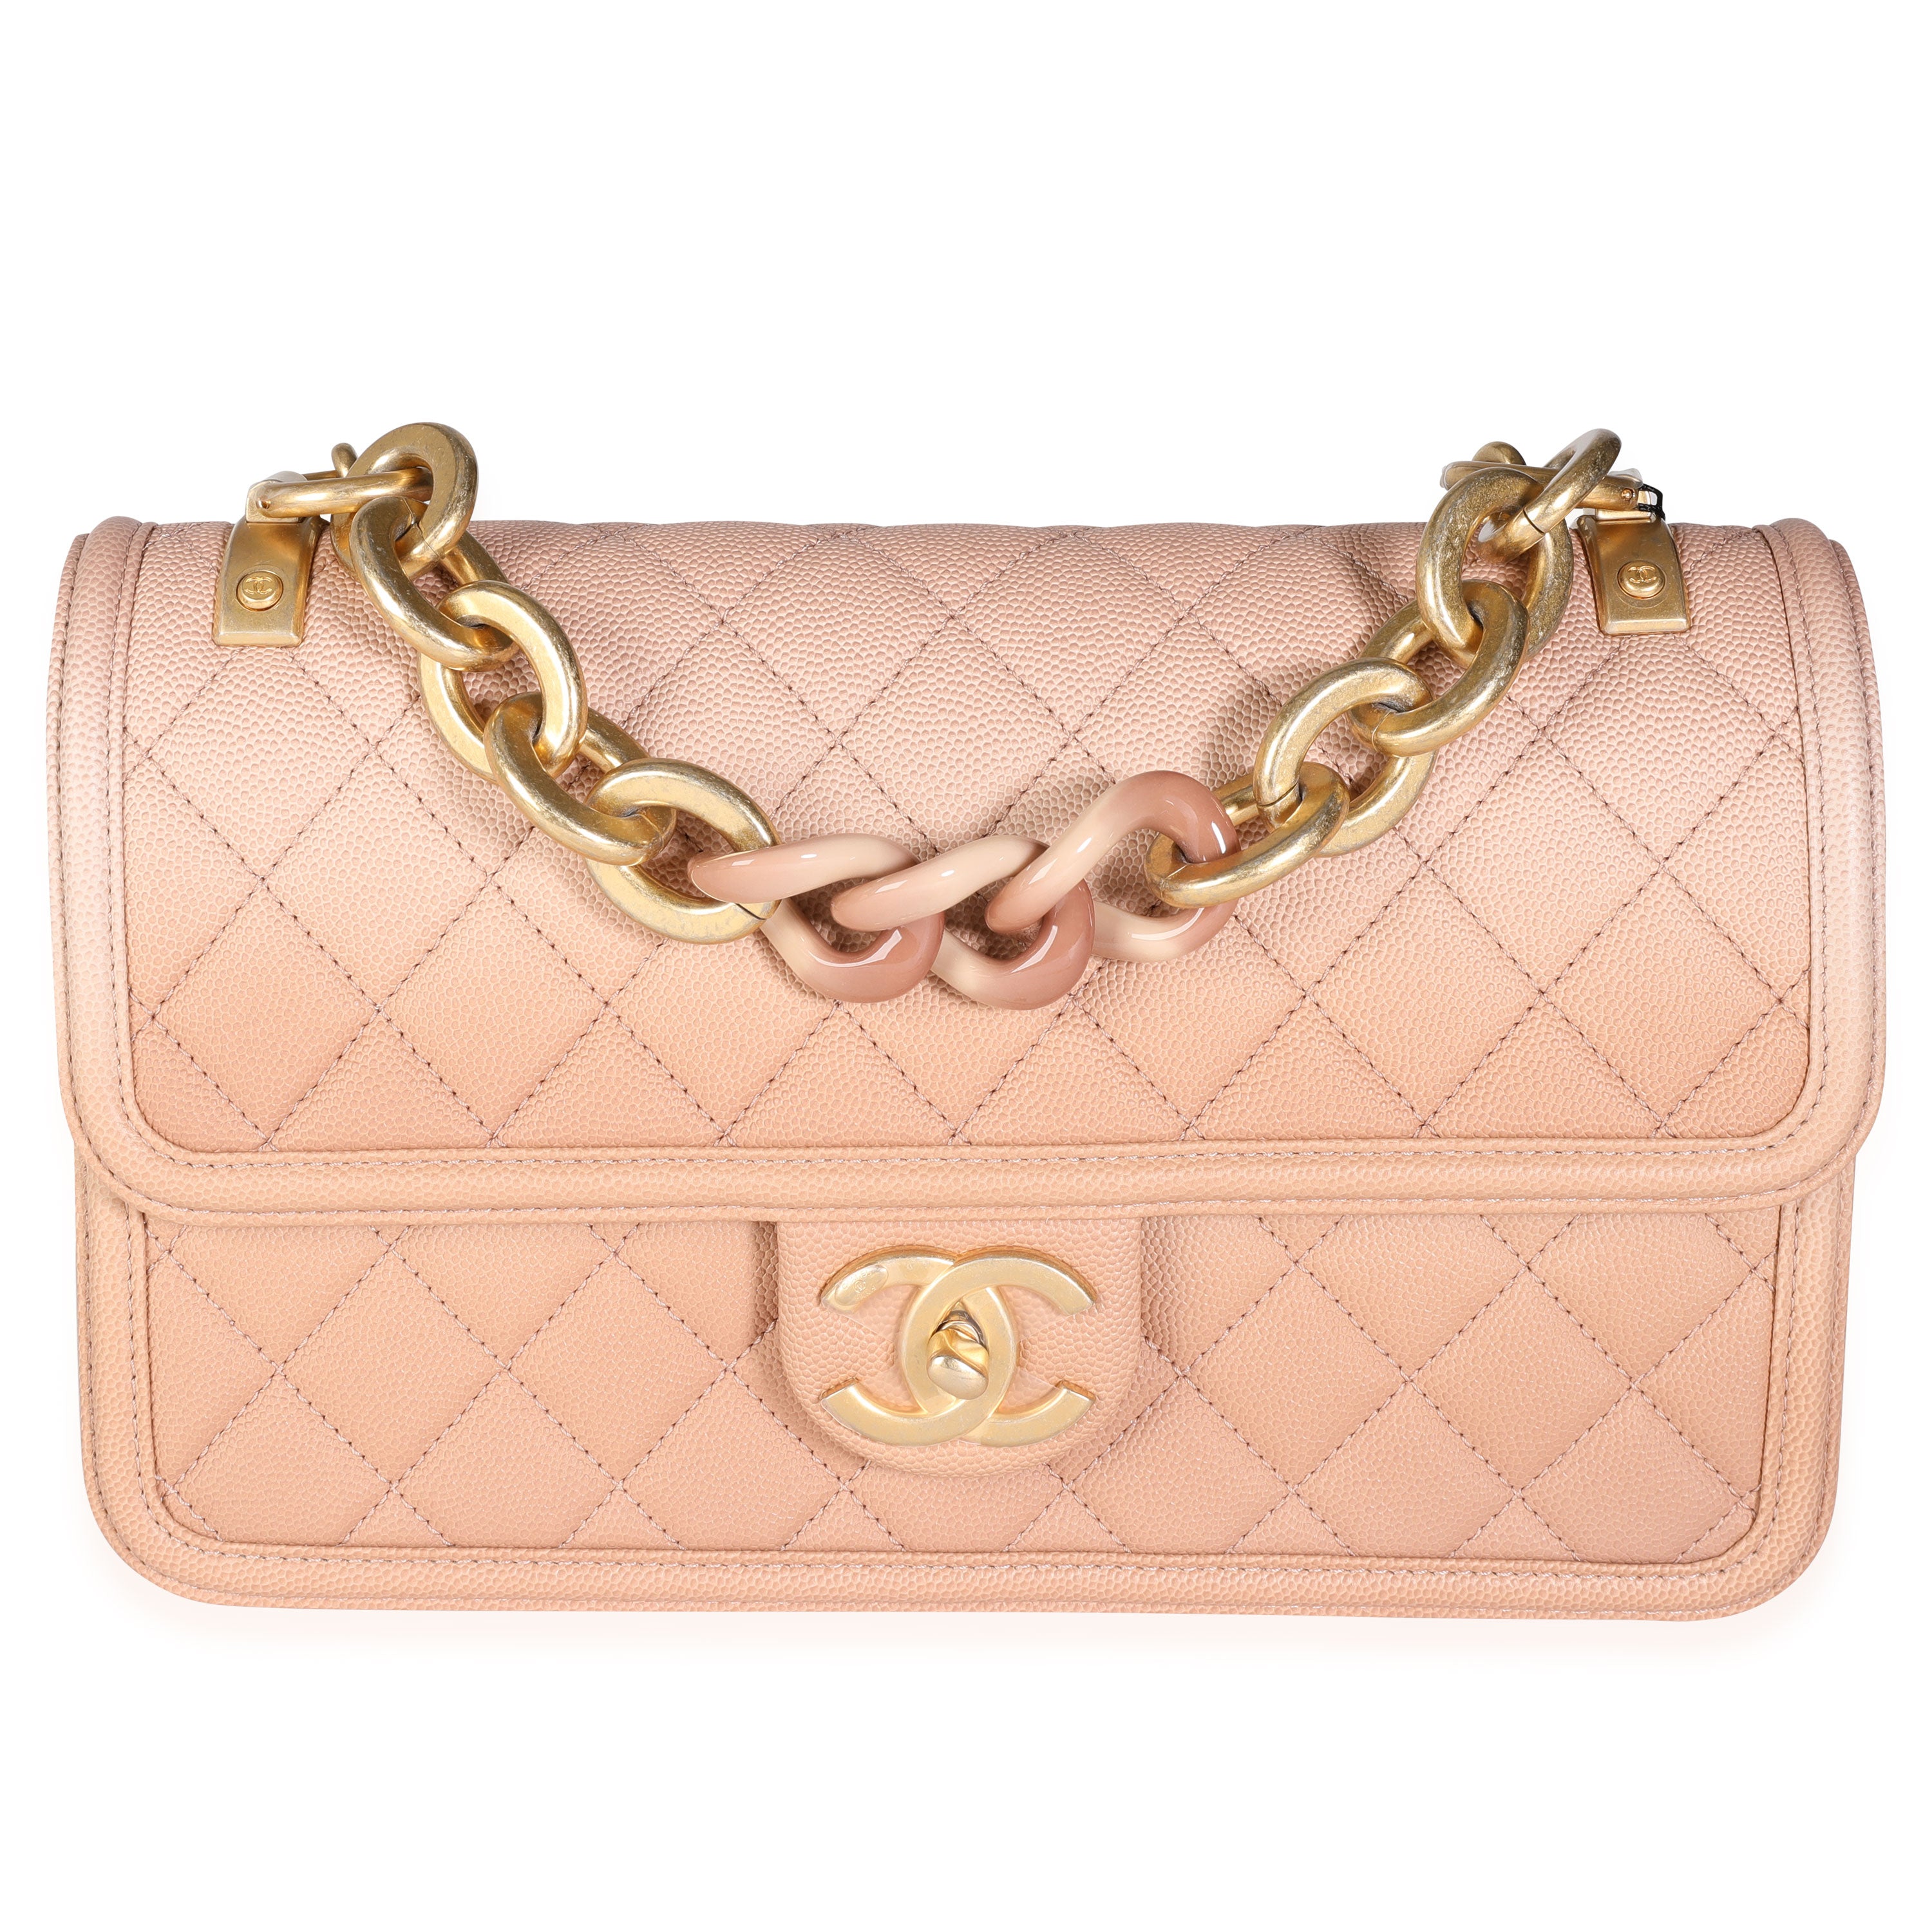 CHANEL Caviar Quilted Medium Sunset On The Sea Flap Blue 446515